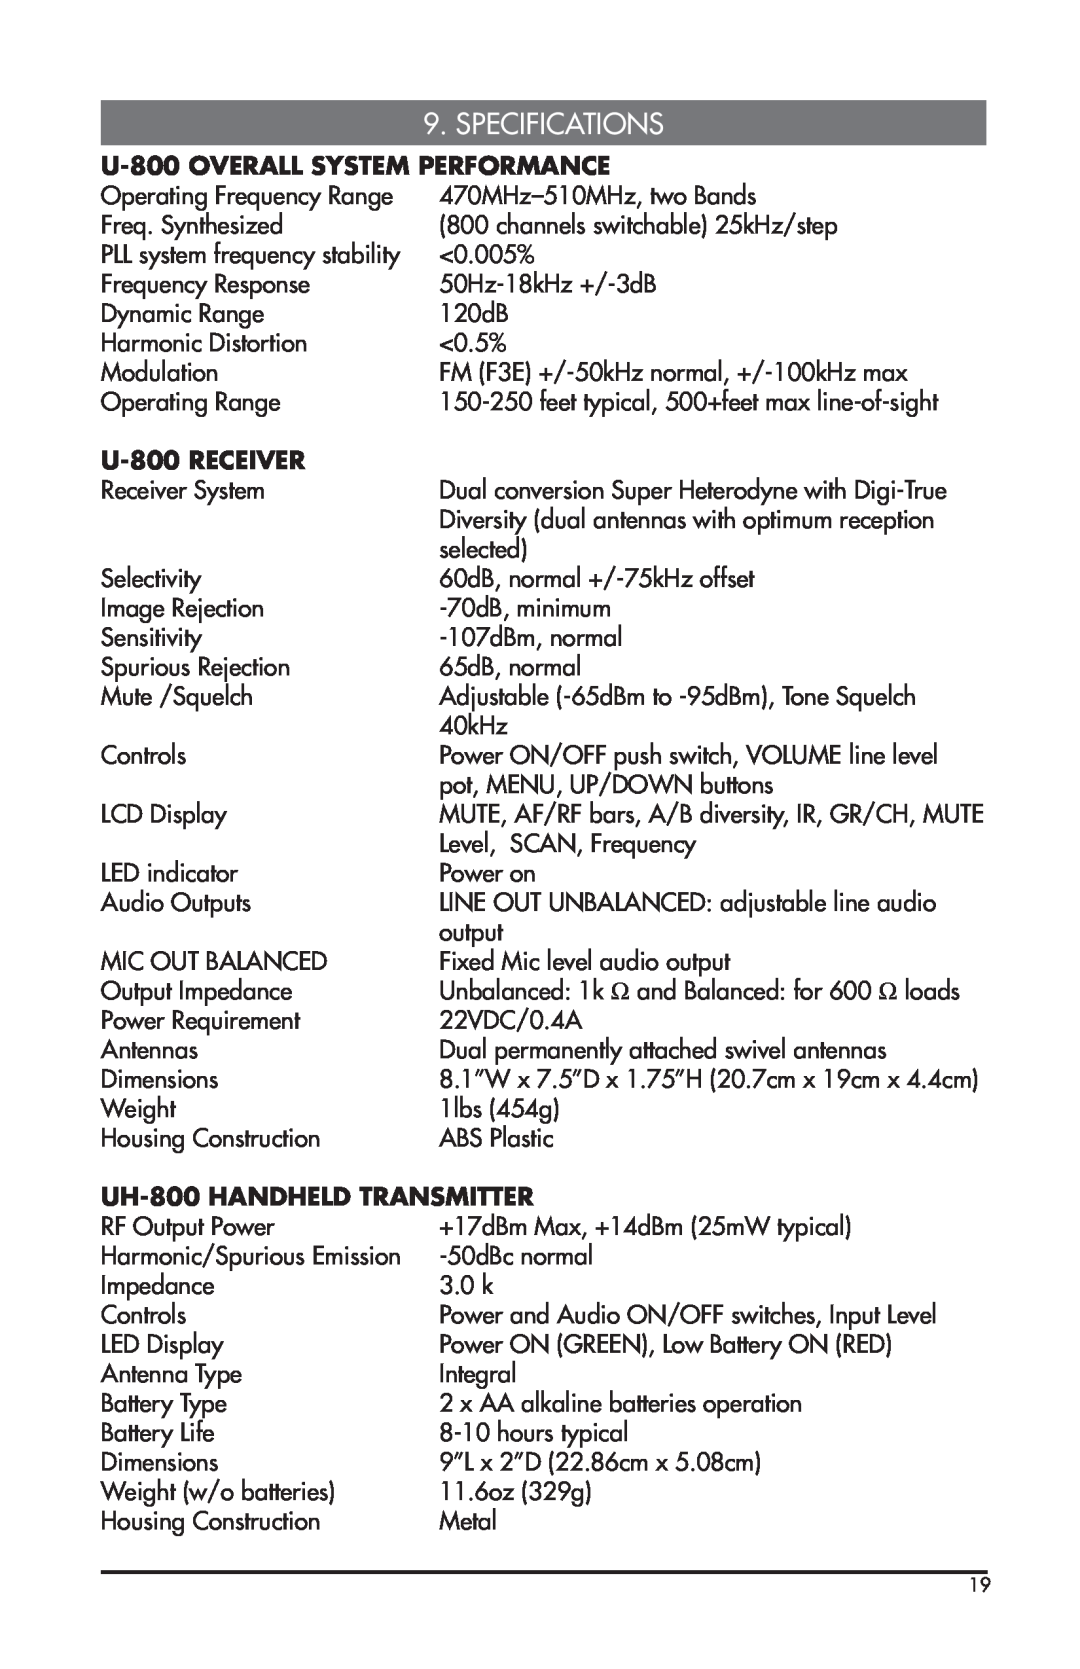 Nady Systems owner manual Specifications, U-800OVERALL SYSTEM PERFORMANCE, U-800RECEIVER, UH-800HANDHELD TRANSMITTER 